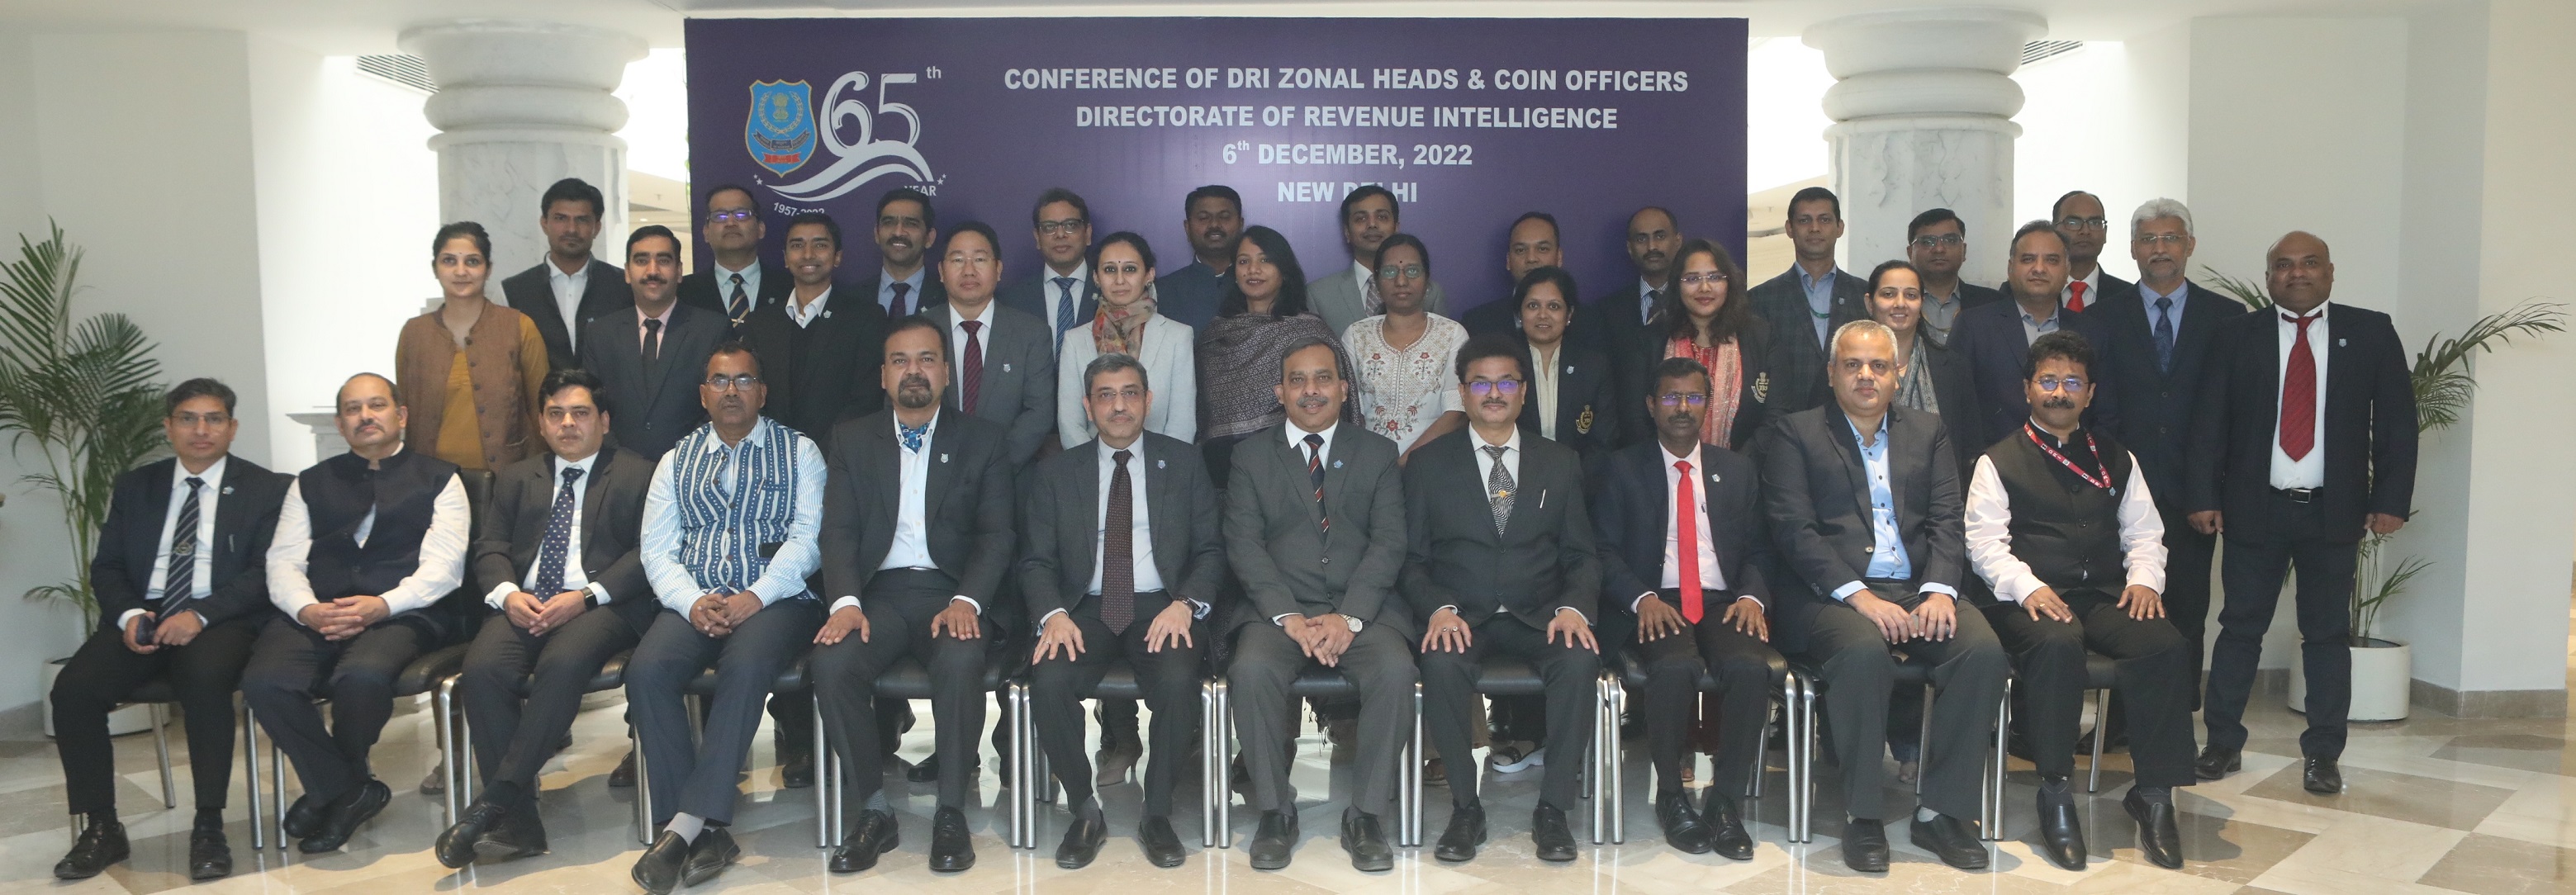 Participants of the Pr. ADGs ADGs Conference held on 6th December 2022